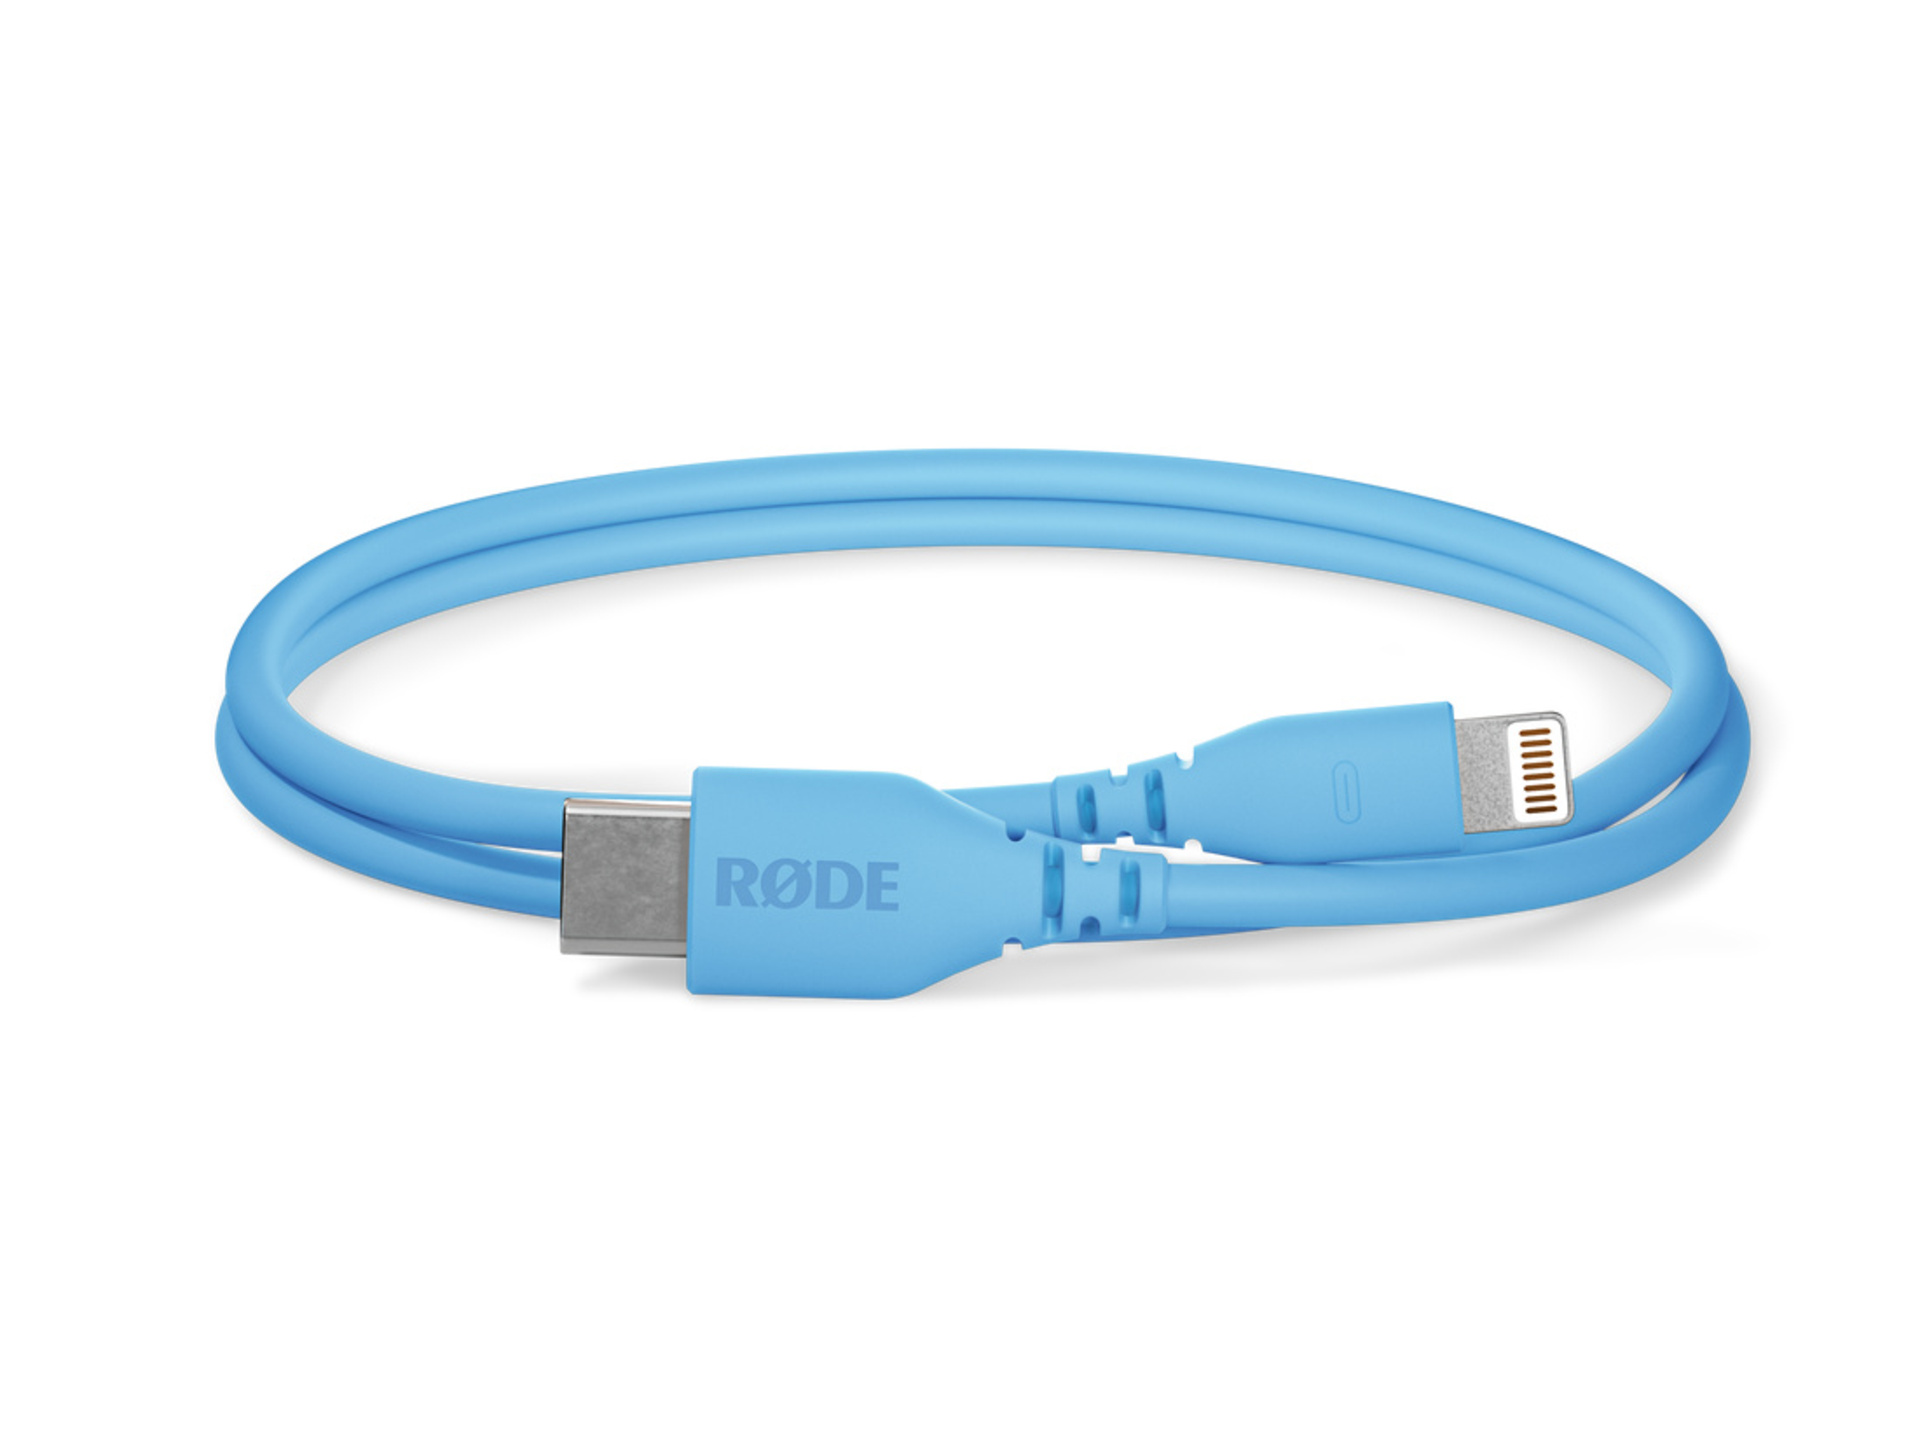 RODE SC21 USB-C to Lightning Cable (30cm, Blue)